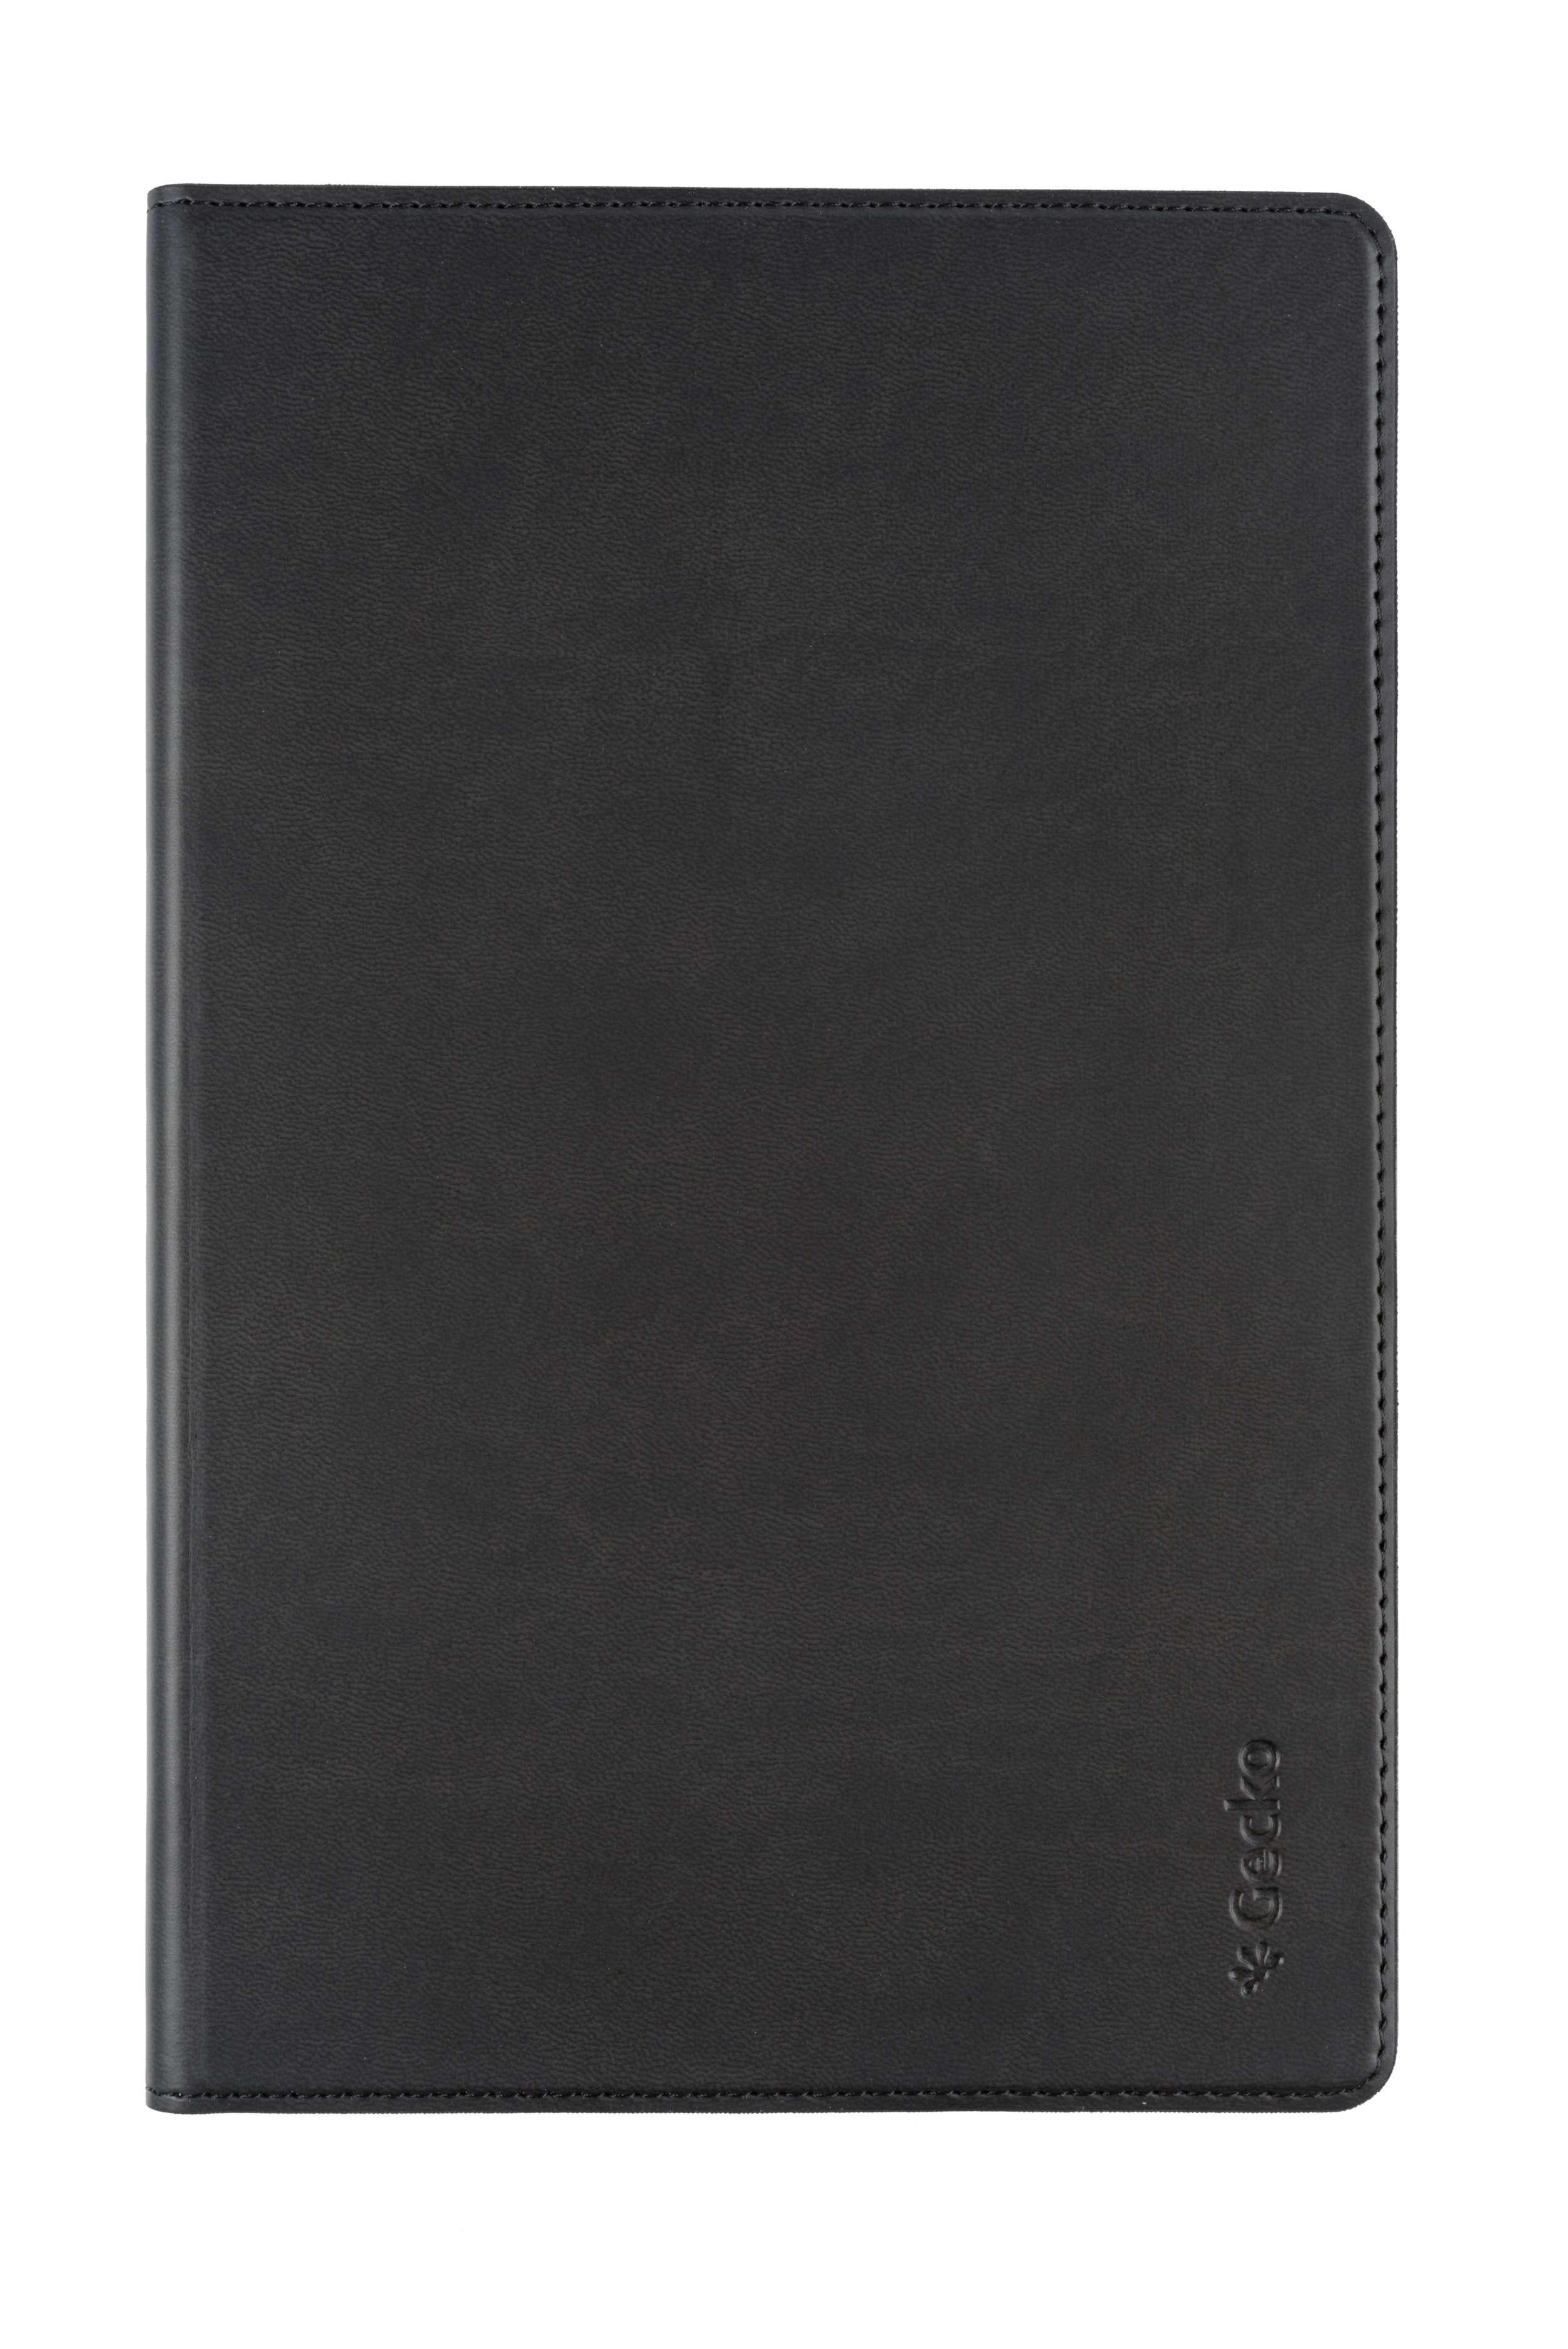 Samsung PU Hülle Tablet Schwarz Cover Easy-Click Leather, 2.0 Bookcover für COVERS GECKO